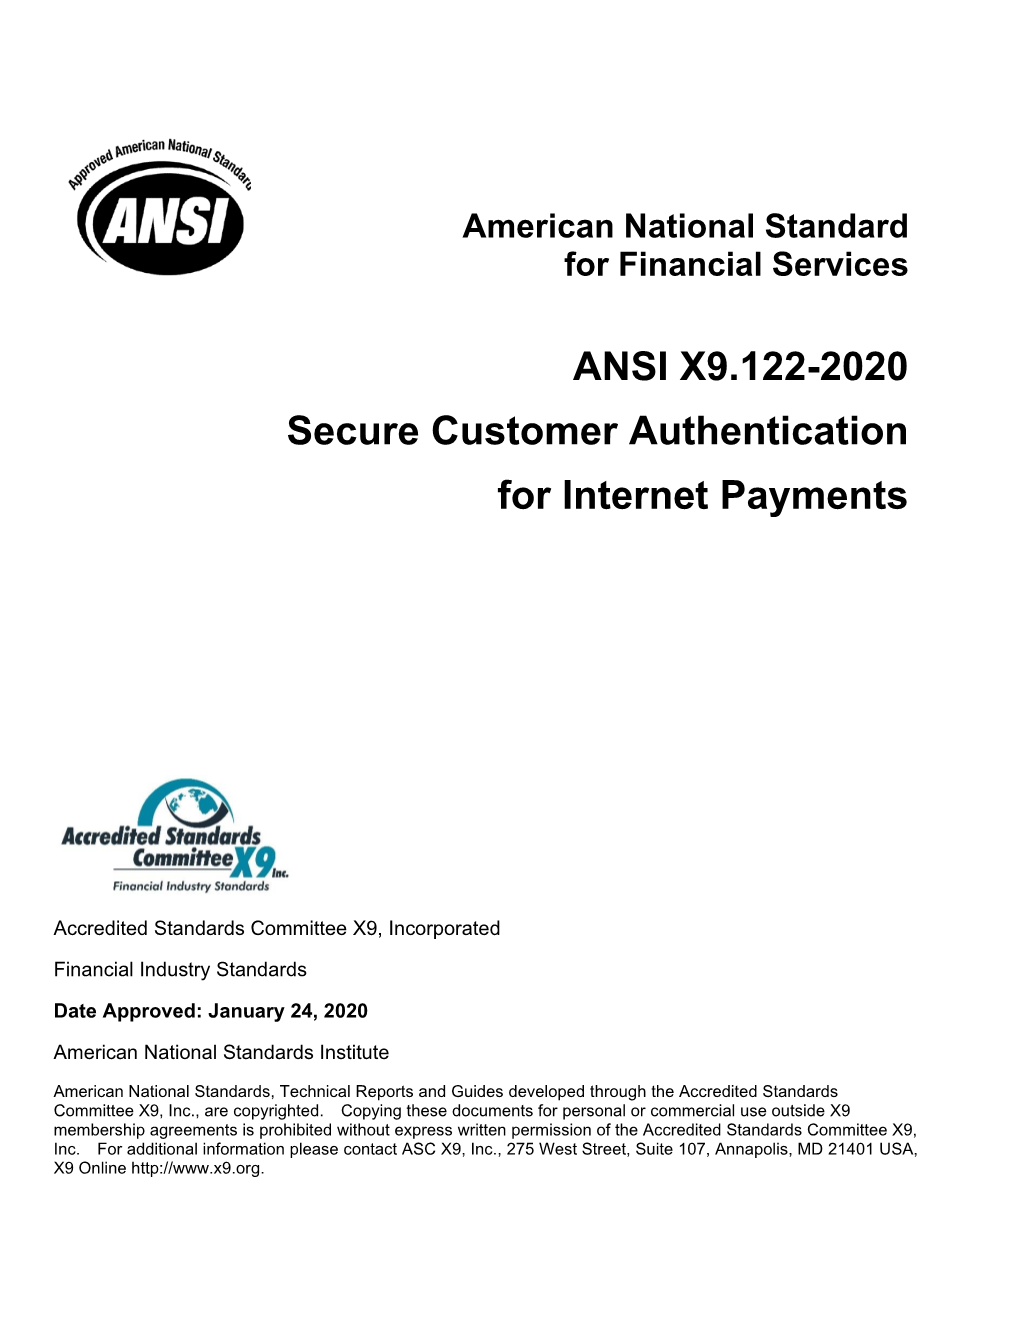 ANSI X9.122-2020 Secure Customer Authentication for Internet Payments